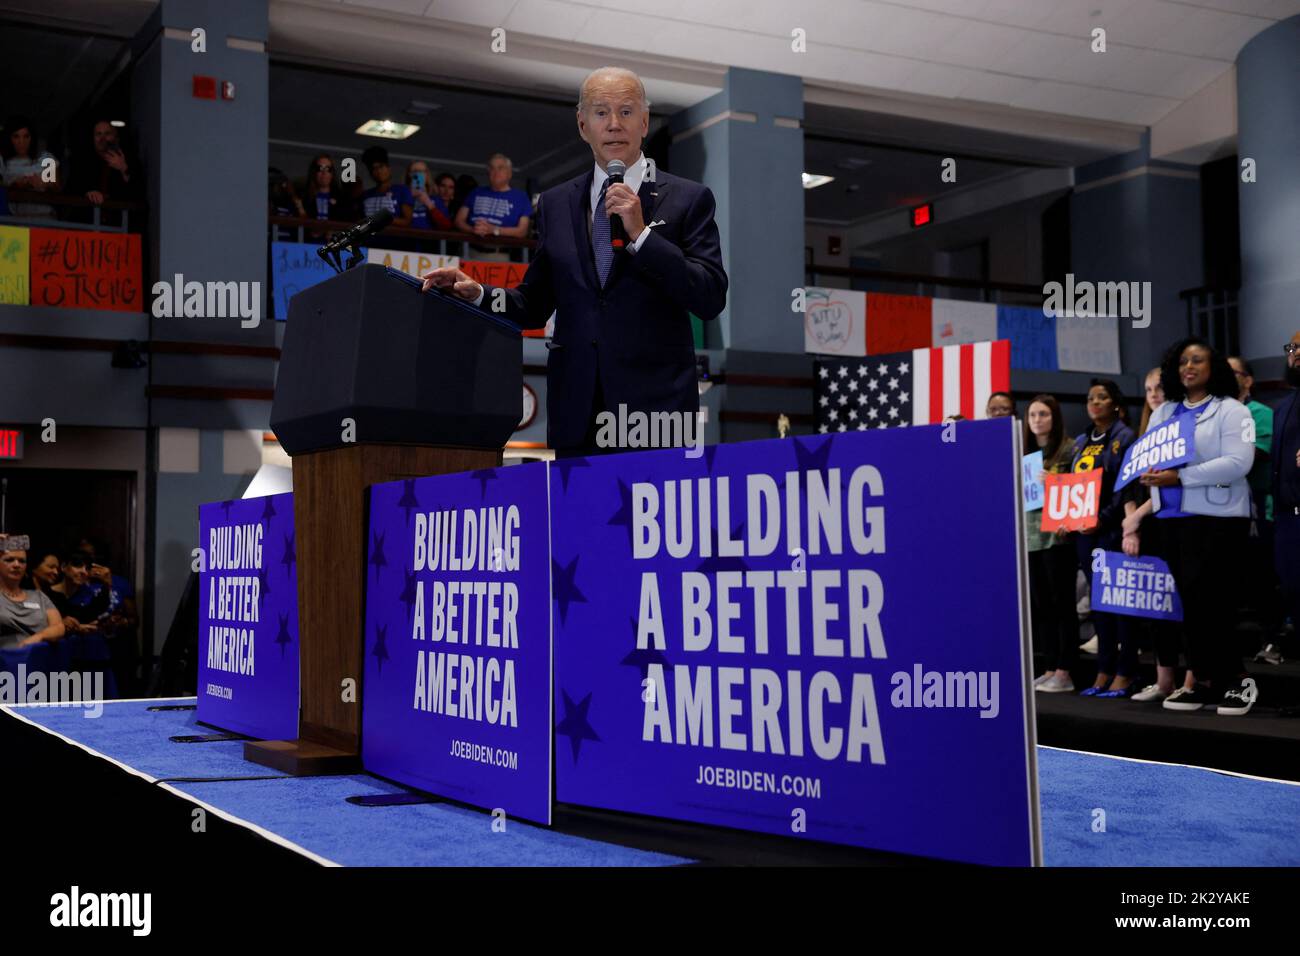 U.S. President Joe Biden delivers remarks at a Democratic National Committee event at the National Education Association headquarters in Washington, U.S., September 23, 2022. REUTERS/Evelyn Hockstein REFILE - QUALITY REPEAT Stock Photo